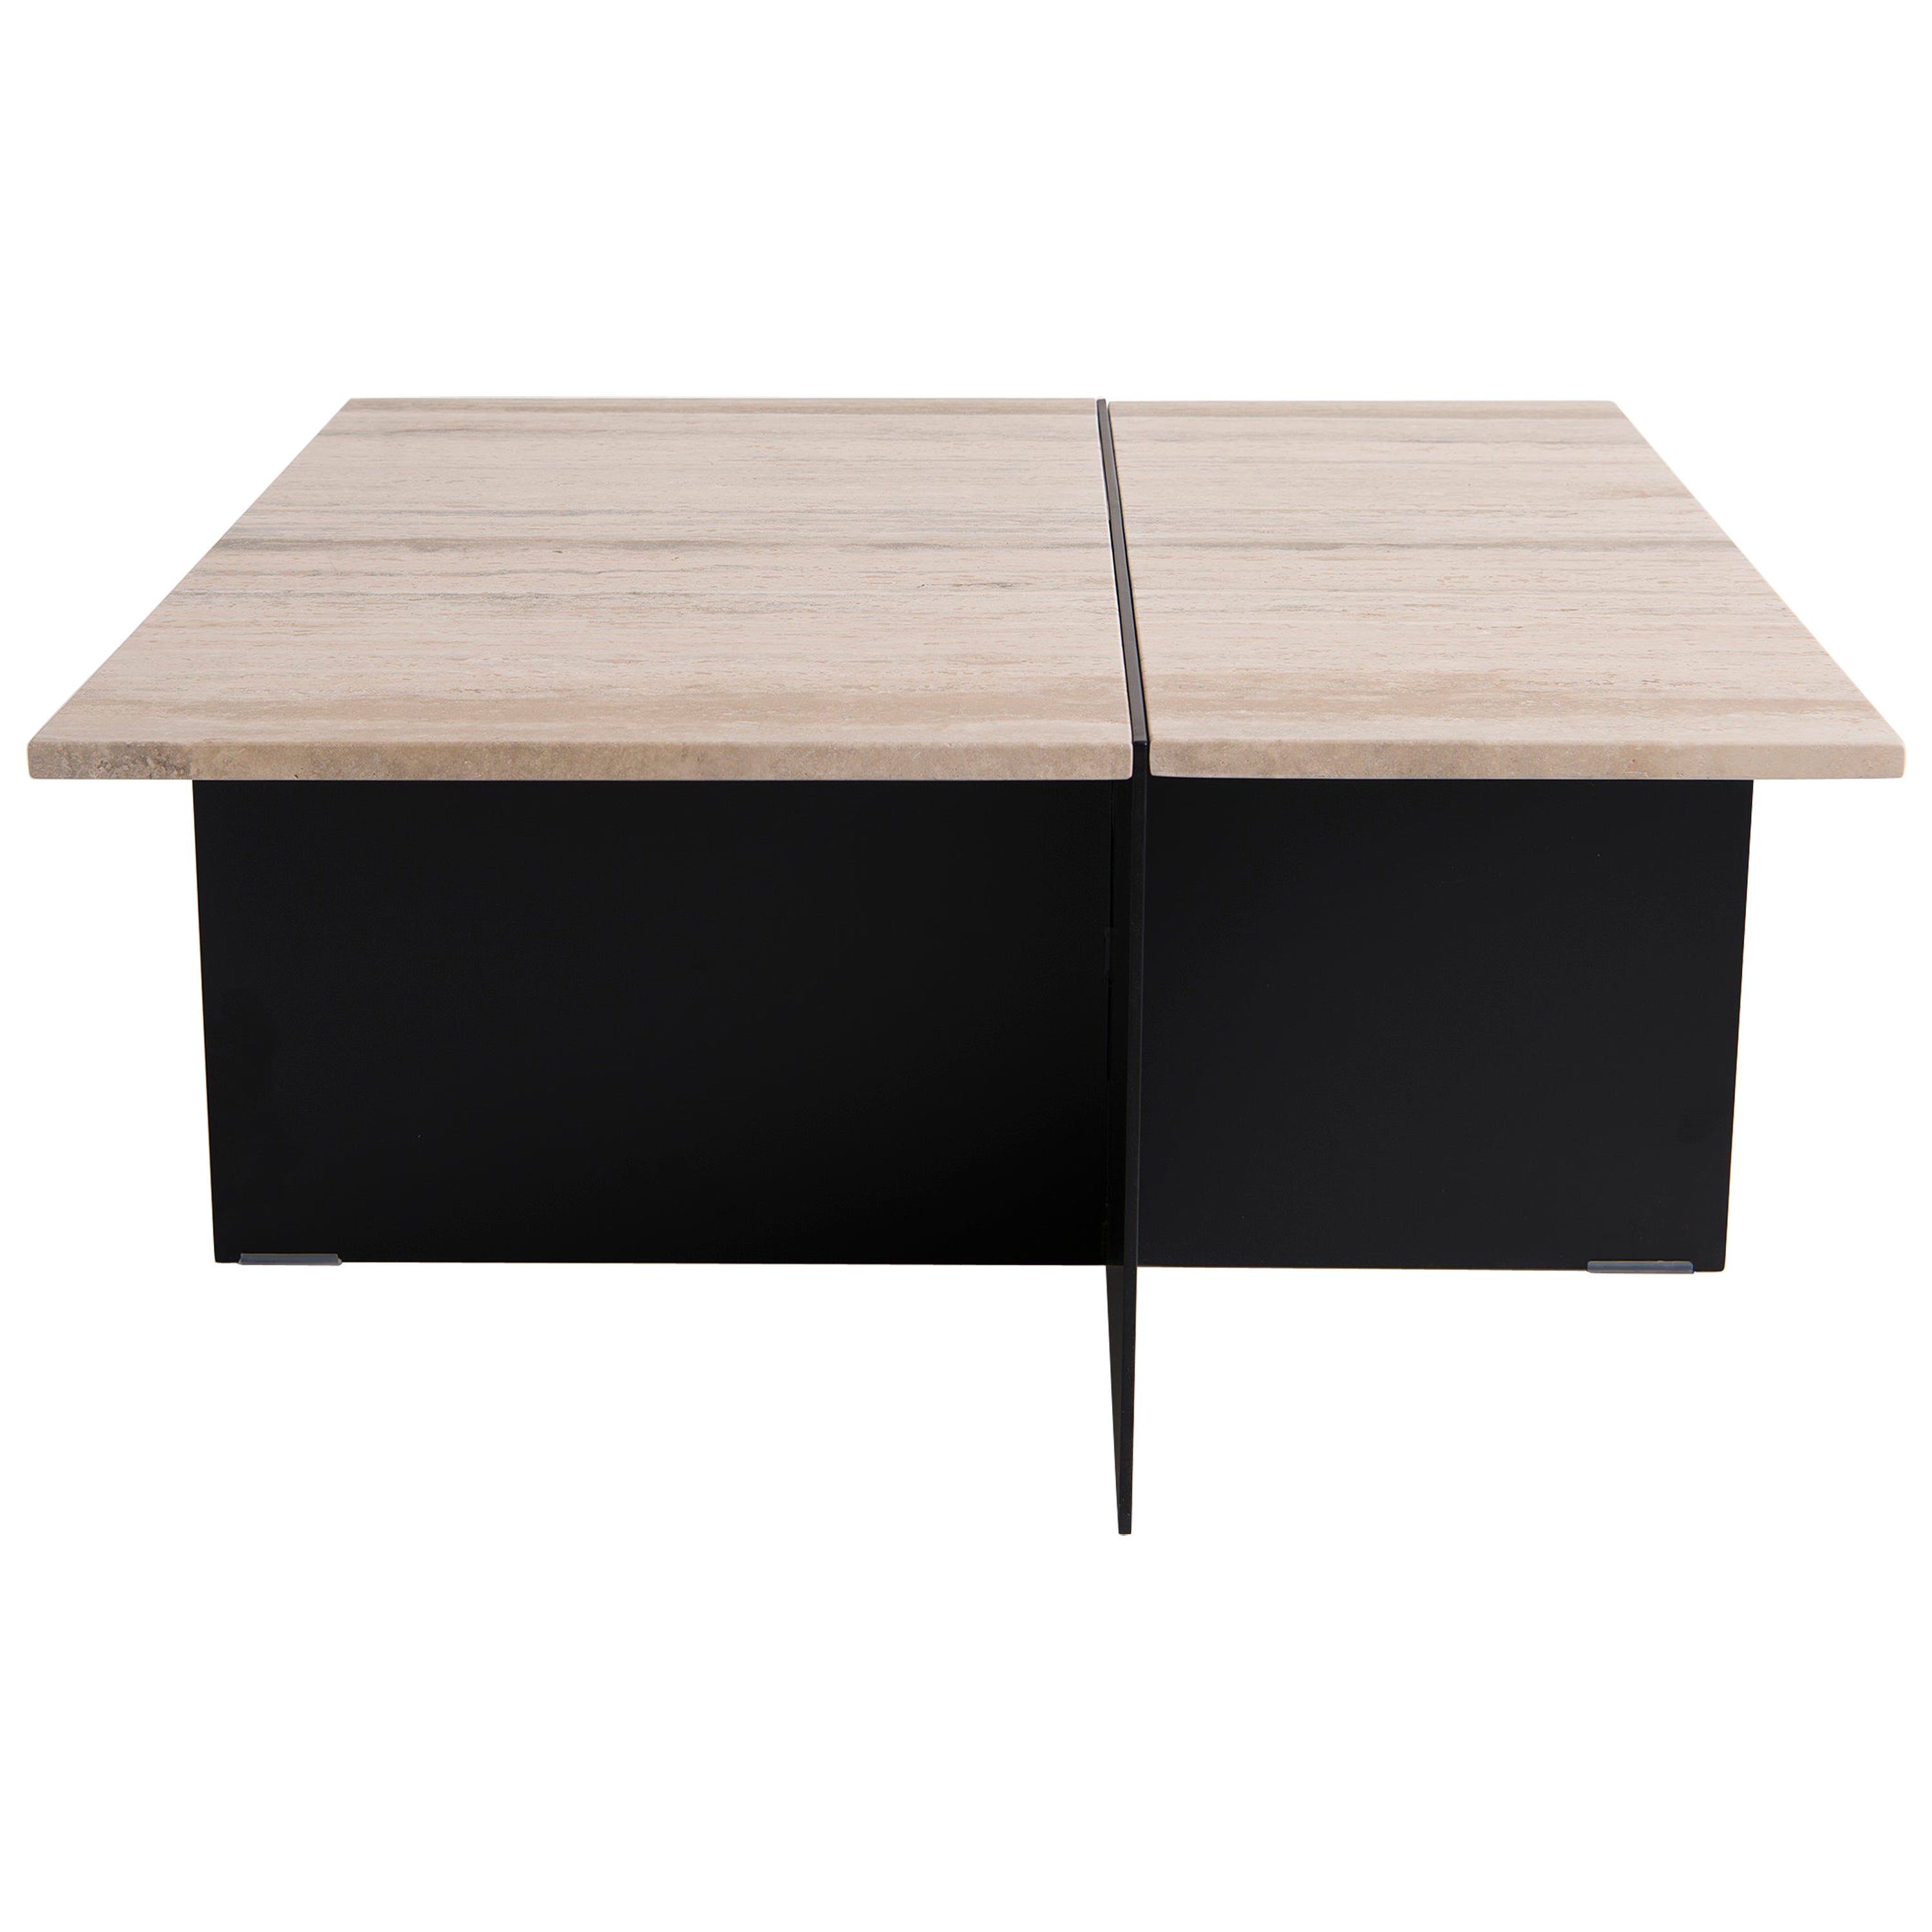 Division Square Coffee Table by Phase Design